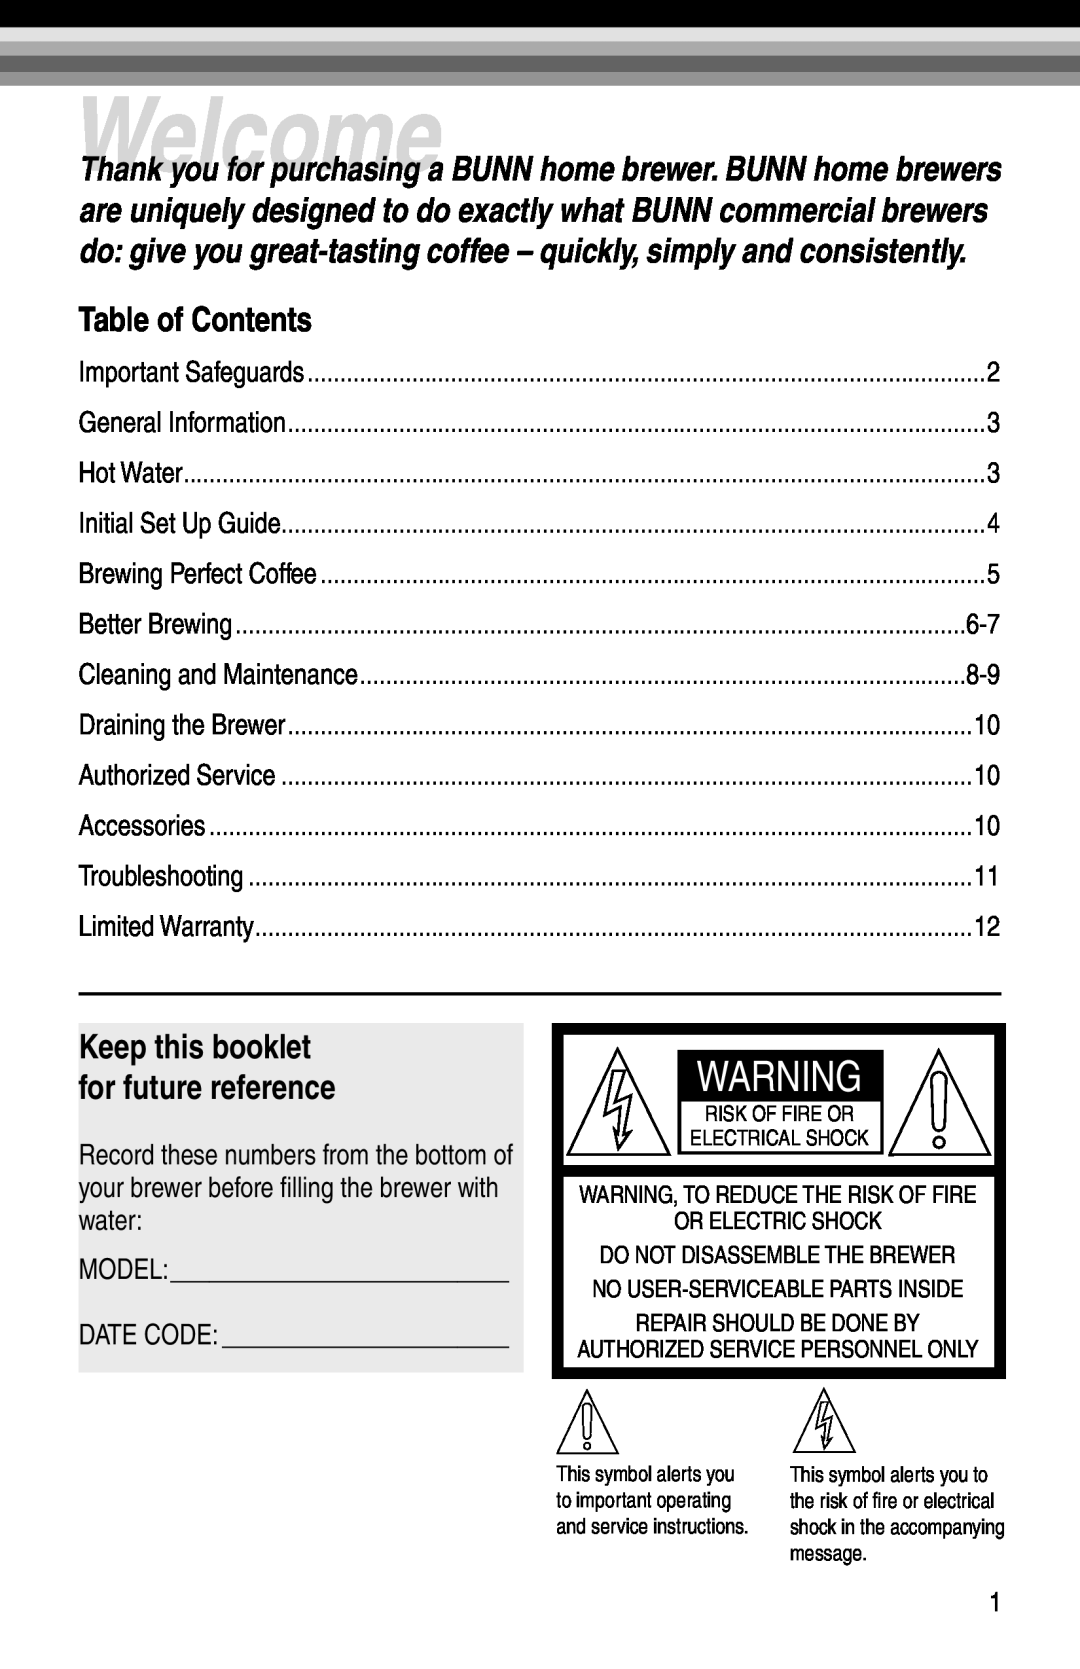 Bunn BX-B, GRX-B, GRX-W, BX-W manual Table of Contents, Welcome, Keep this booklet for future reference 